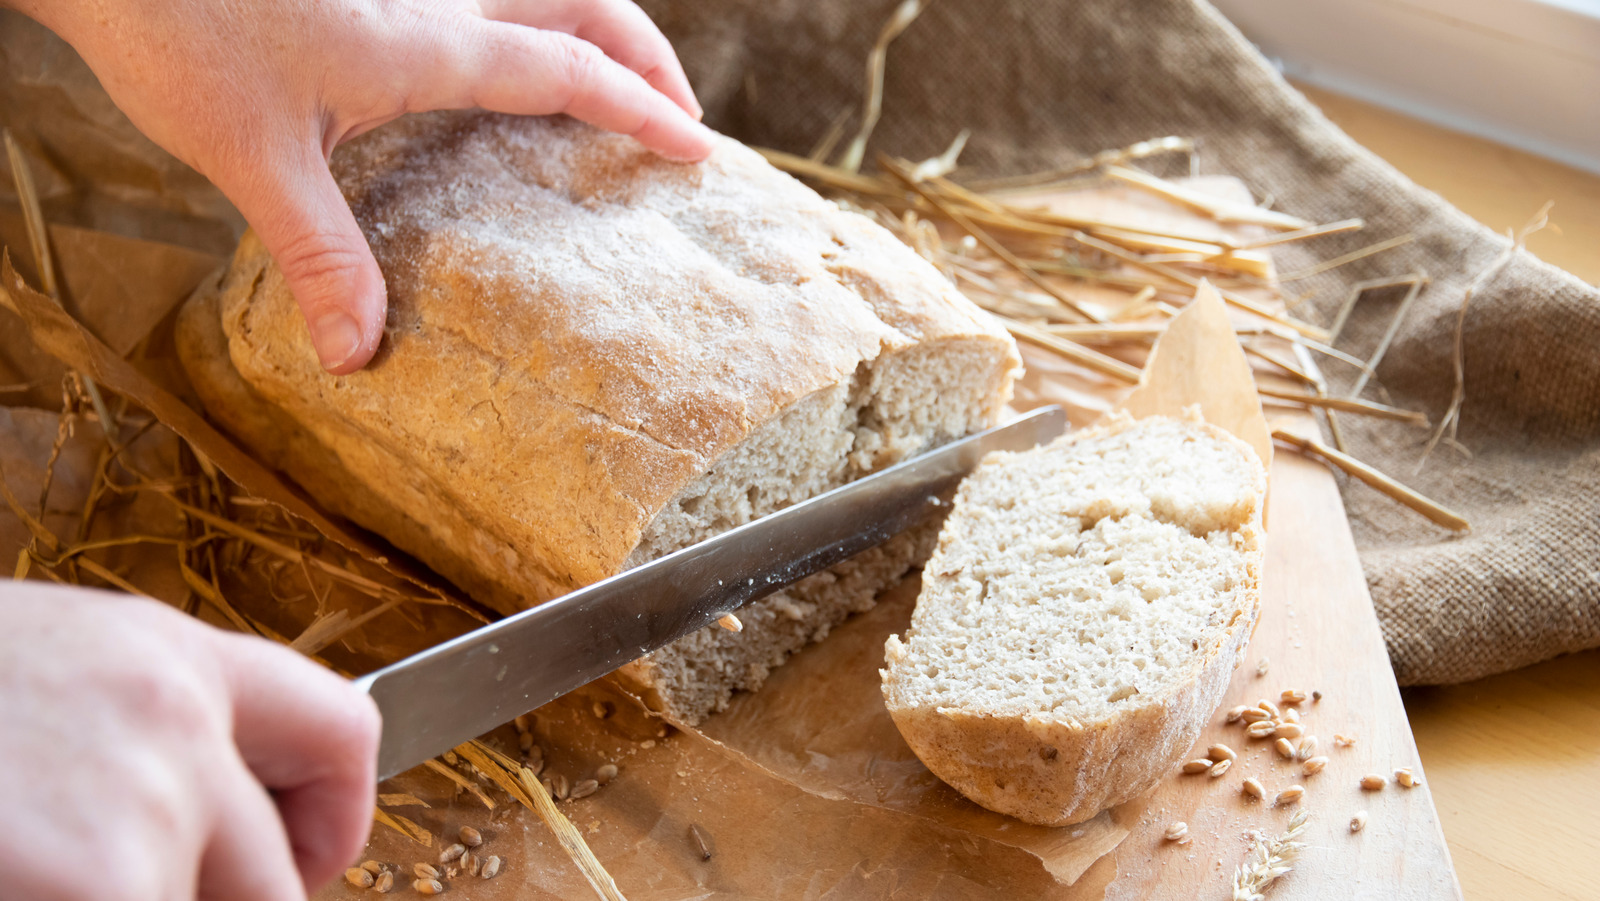 https://www.tastingtable.com/img/gallery/why-you-shouldnt-slice-into-fresh-baked-bread-before-its-cool/l-intro-1652472978.jpg